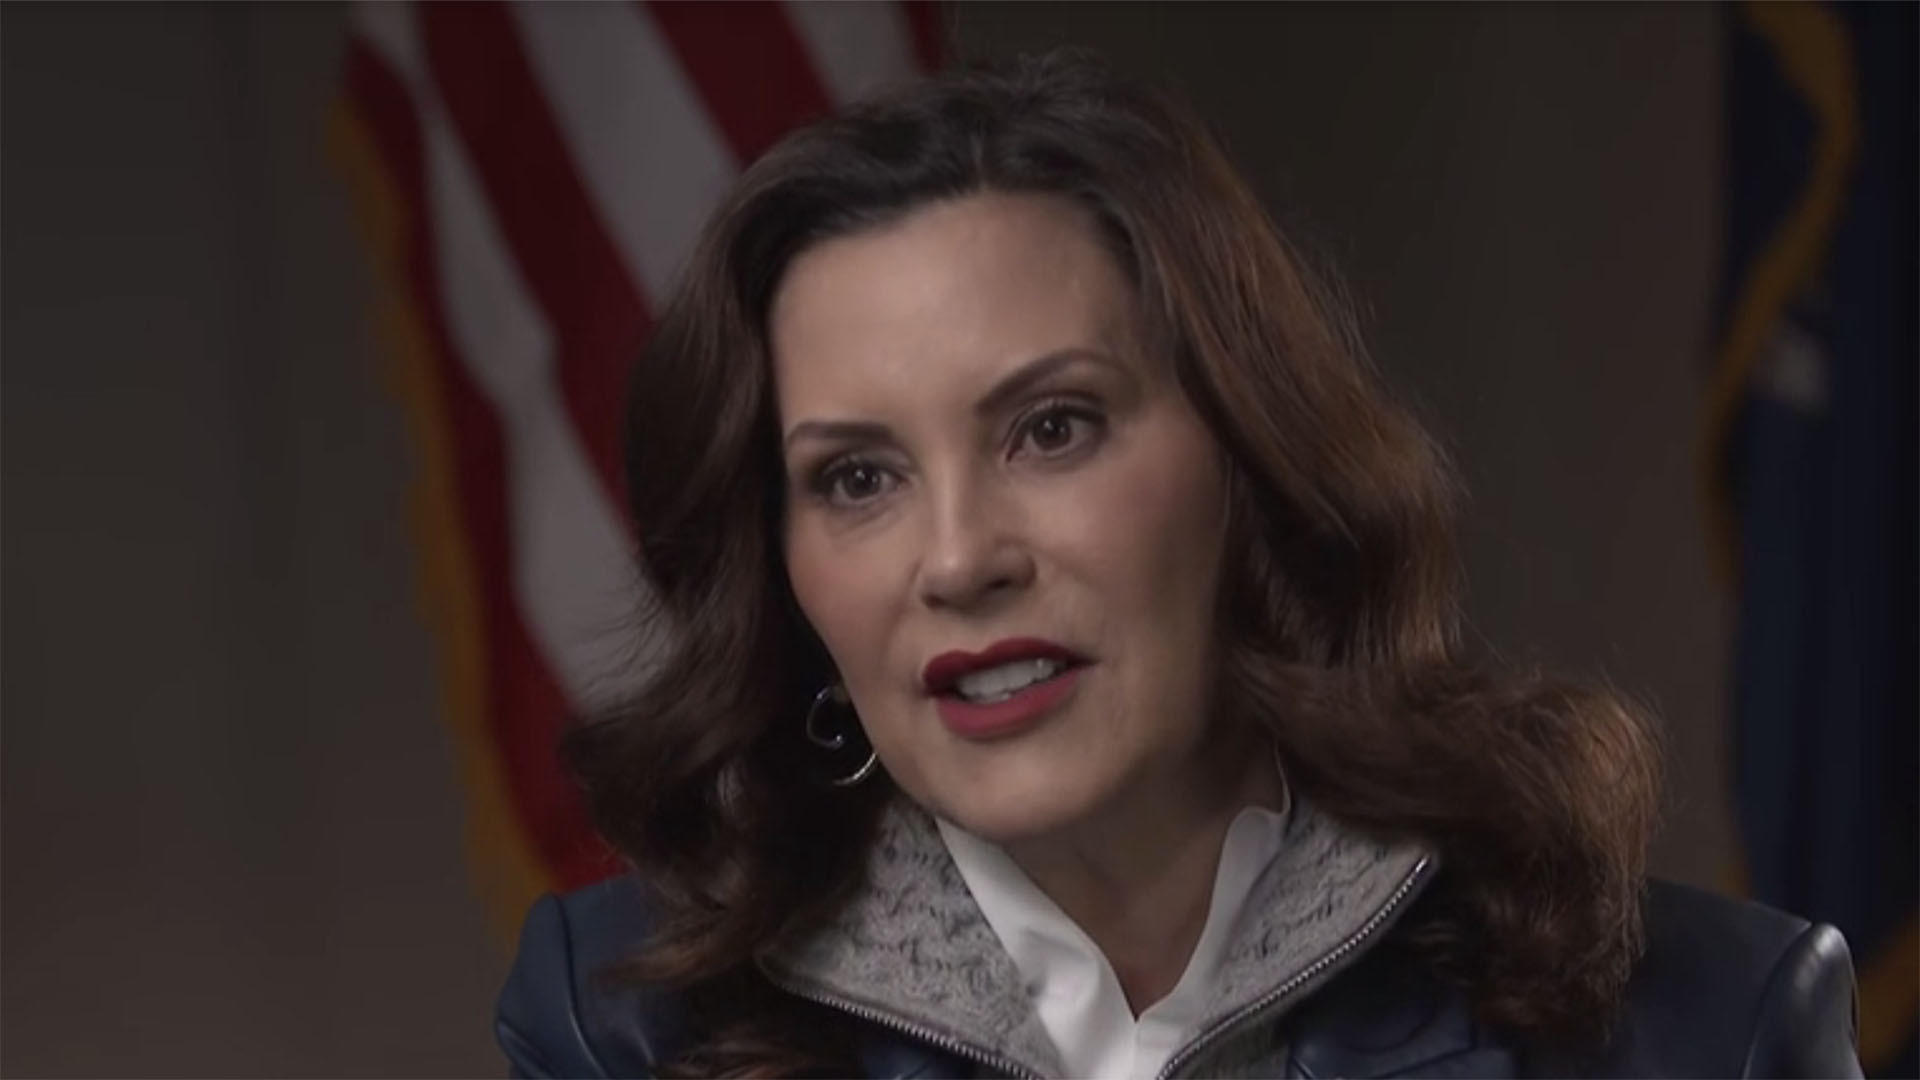 whitmer: don't make assumptions about next election